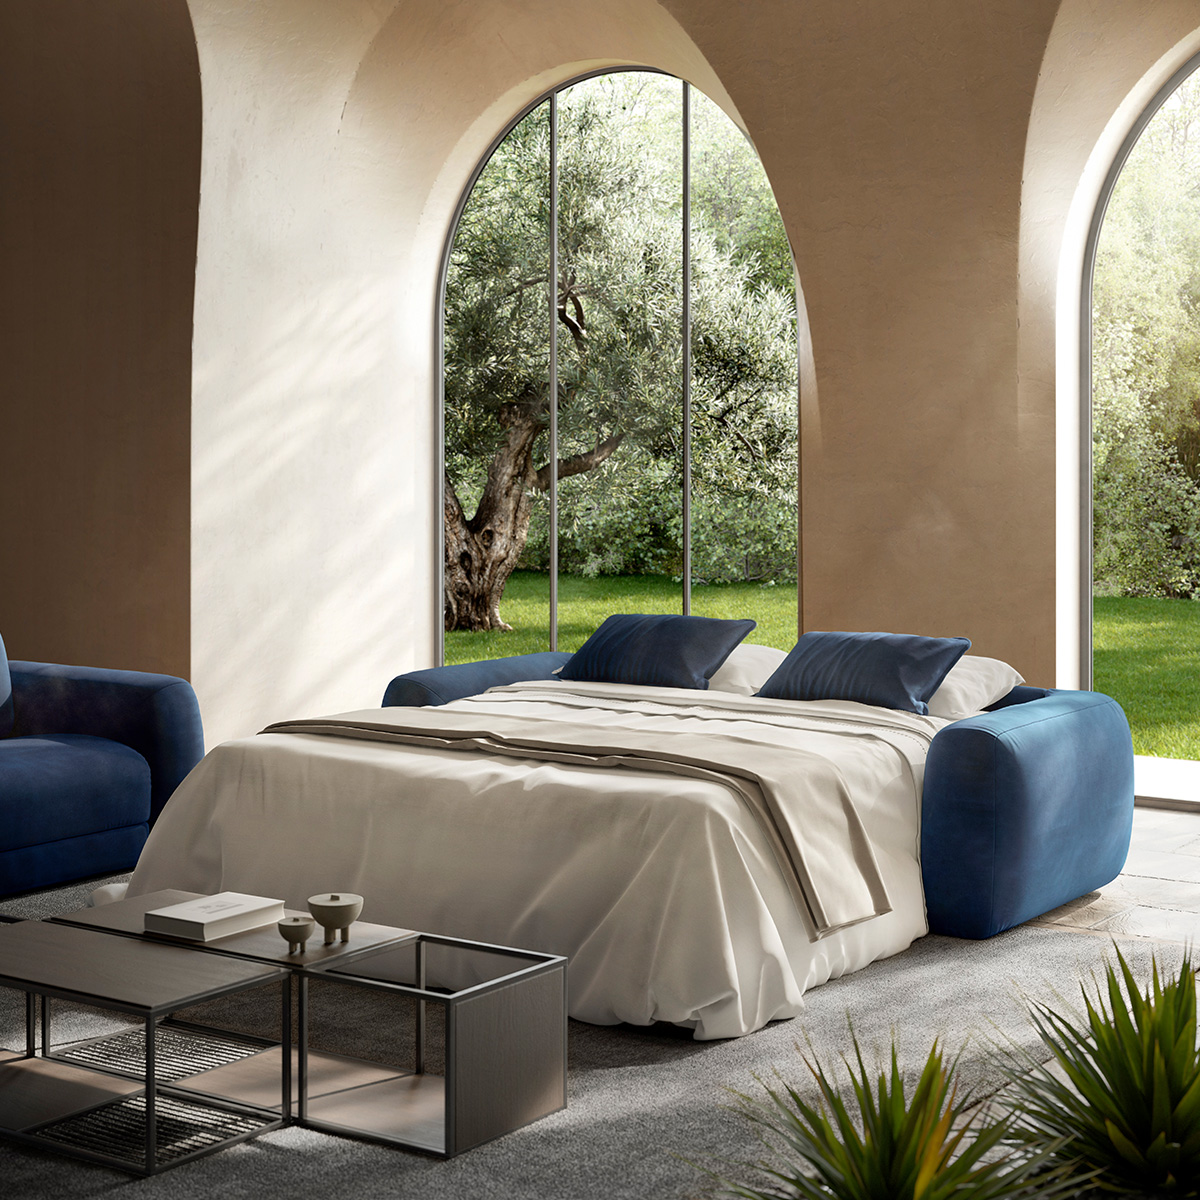 Natuzzi editorial - “Ready-to-bed”-mechanisme